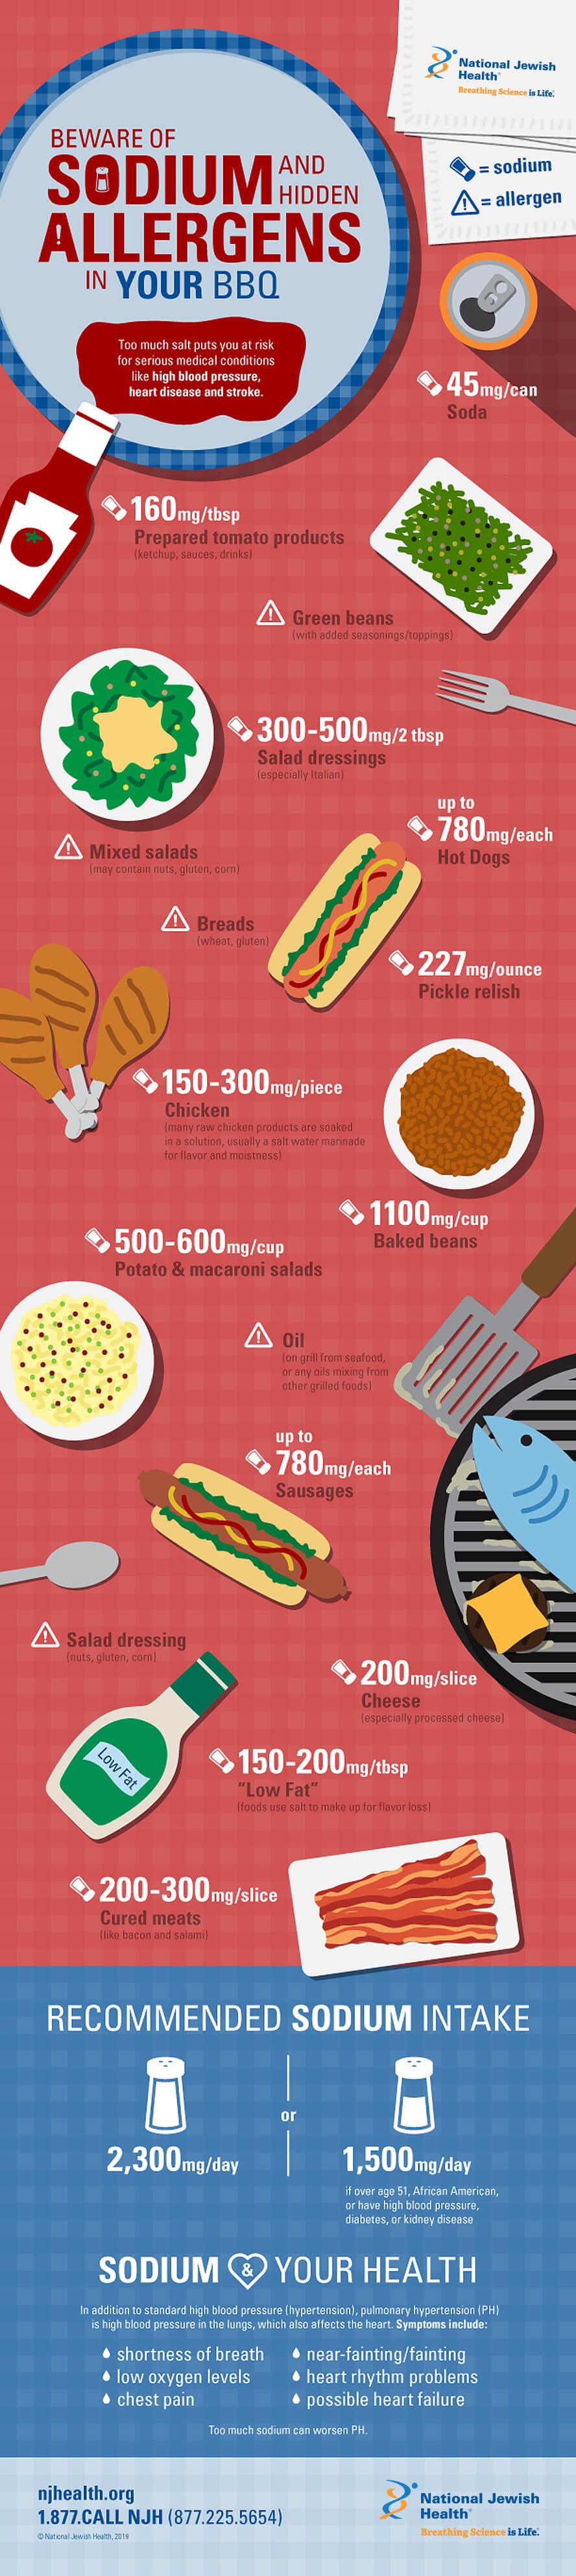 ﻿﻿Beware of Sodium and Hidden Allergens in Your BBQ Infographic